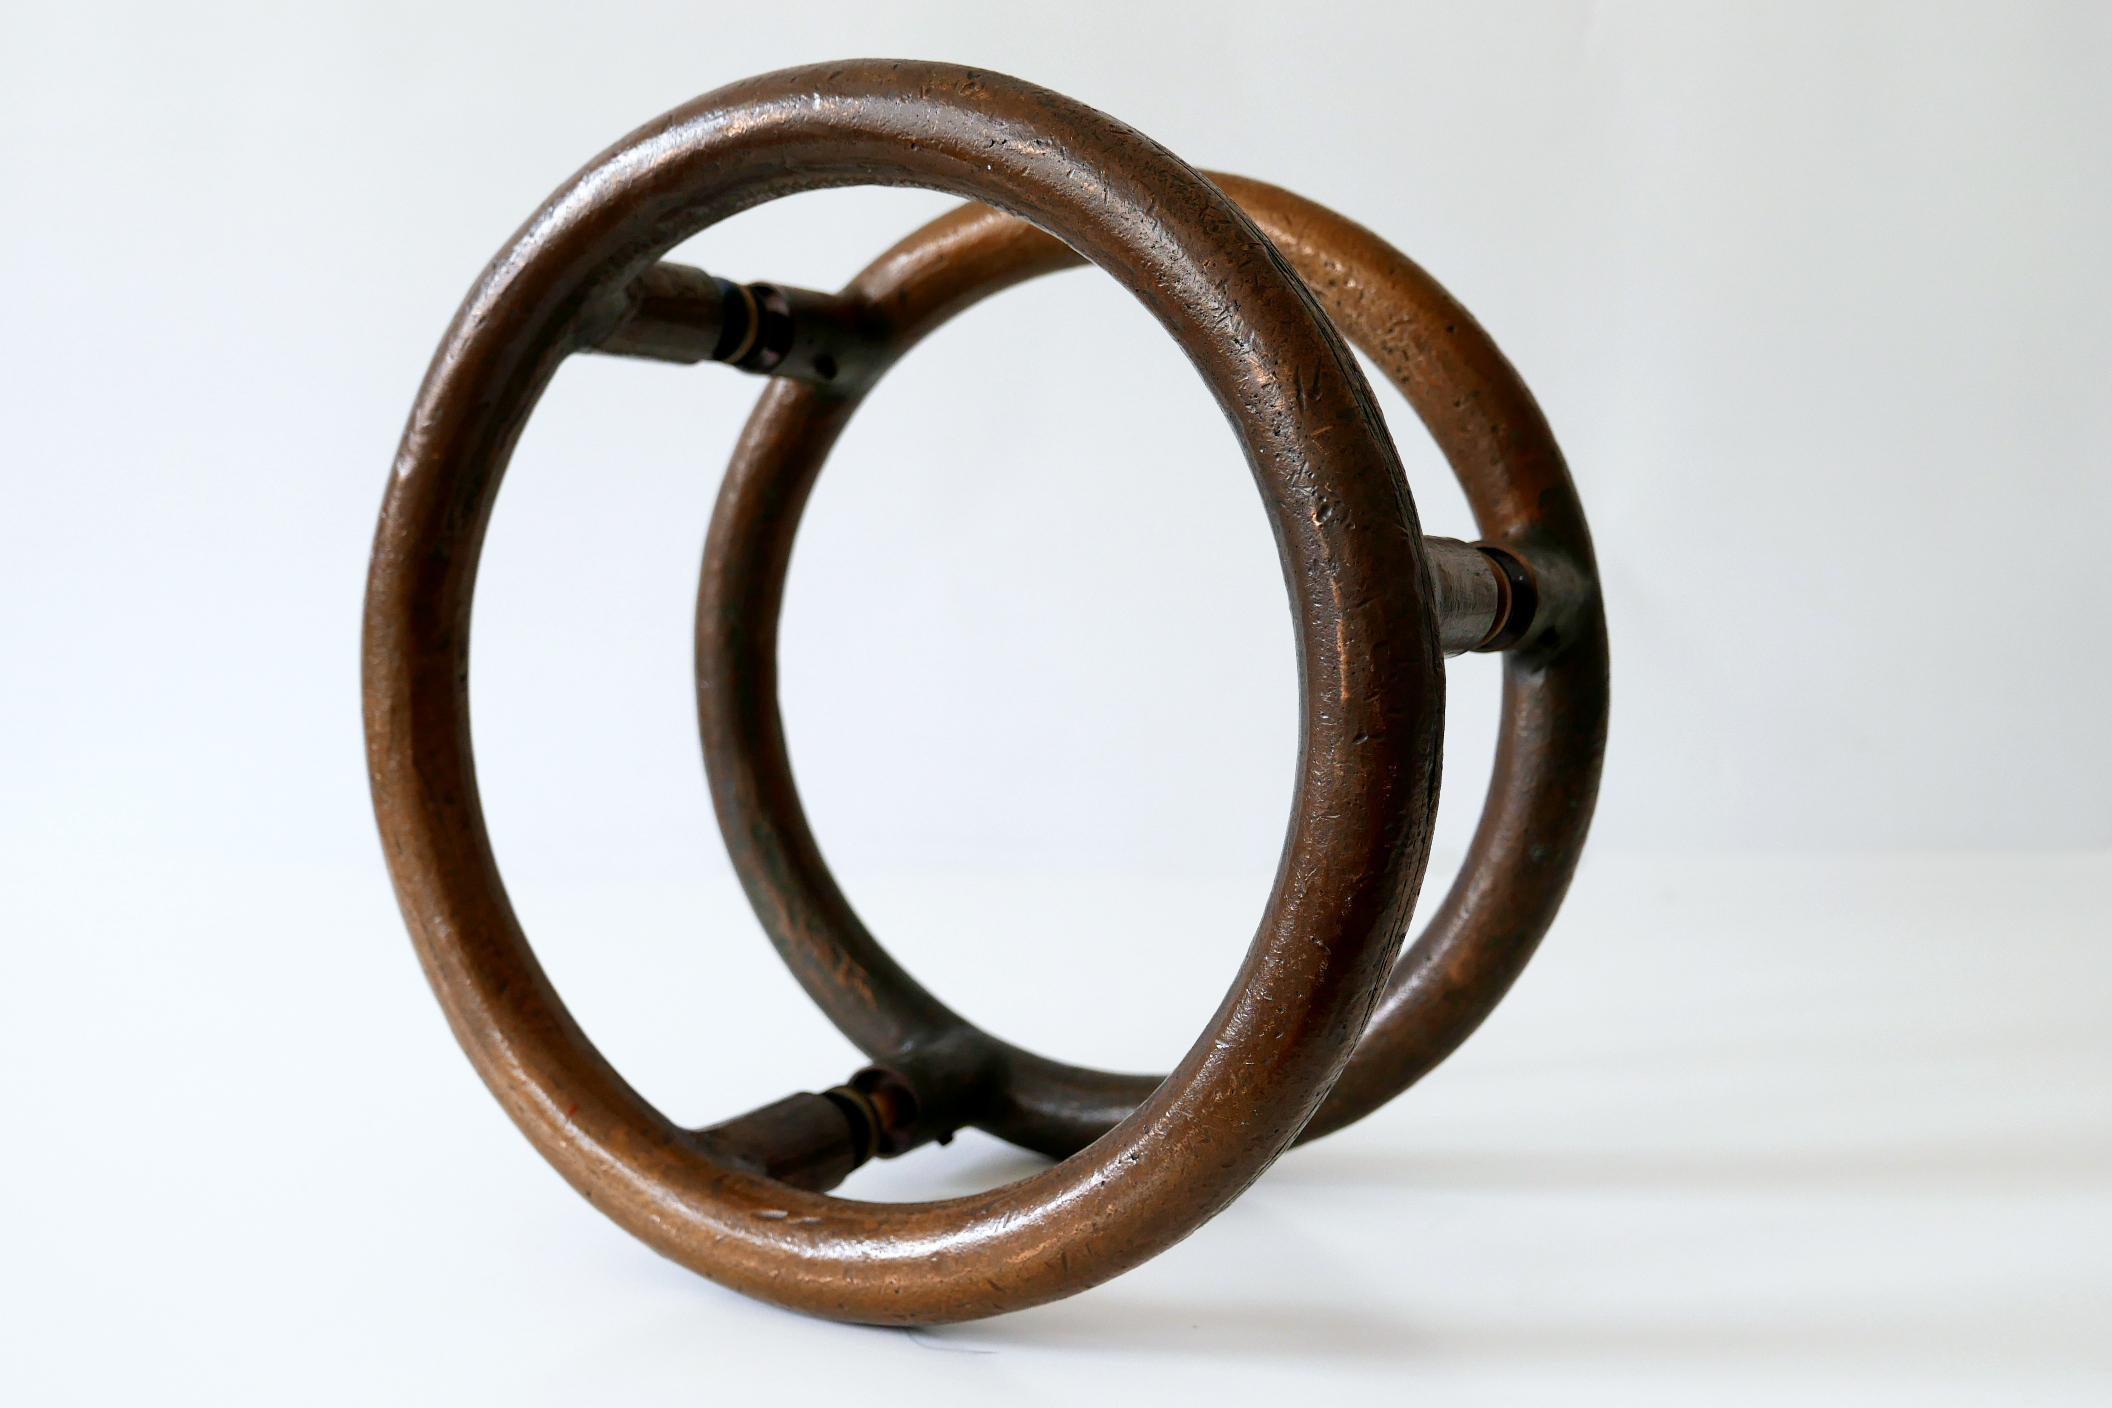 Large and heavy Mid-Century Modern push and pull bronze door handles. 
Designed & manufactured probably in Germany, 1950s. Executed in massive bronze.

Dimensions: 
Diameter 11.82 in. (30 cm)
Depth 6.89 in (17.5 cm)
Depth to plate of each handle